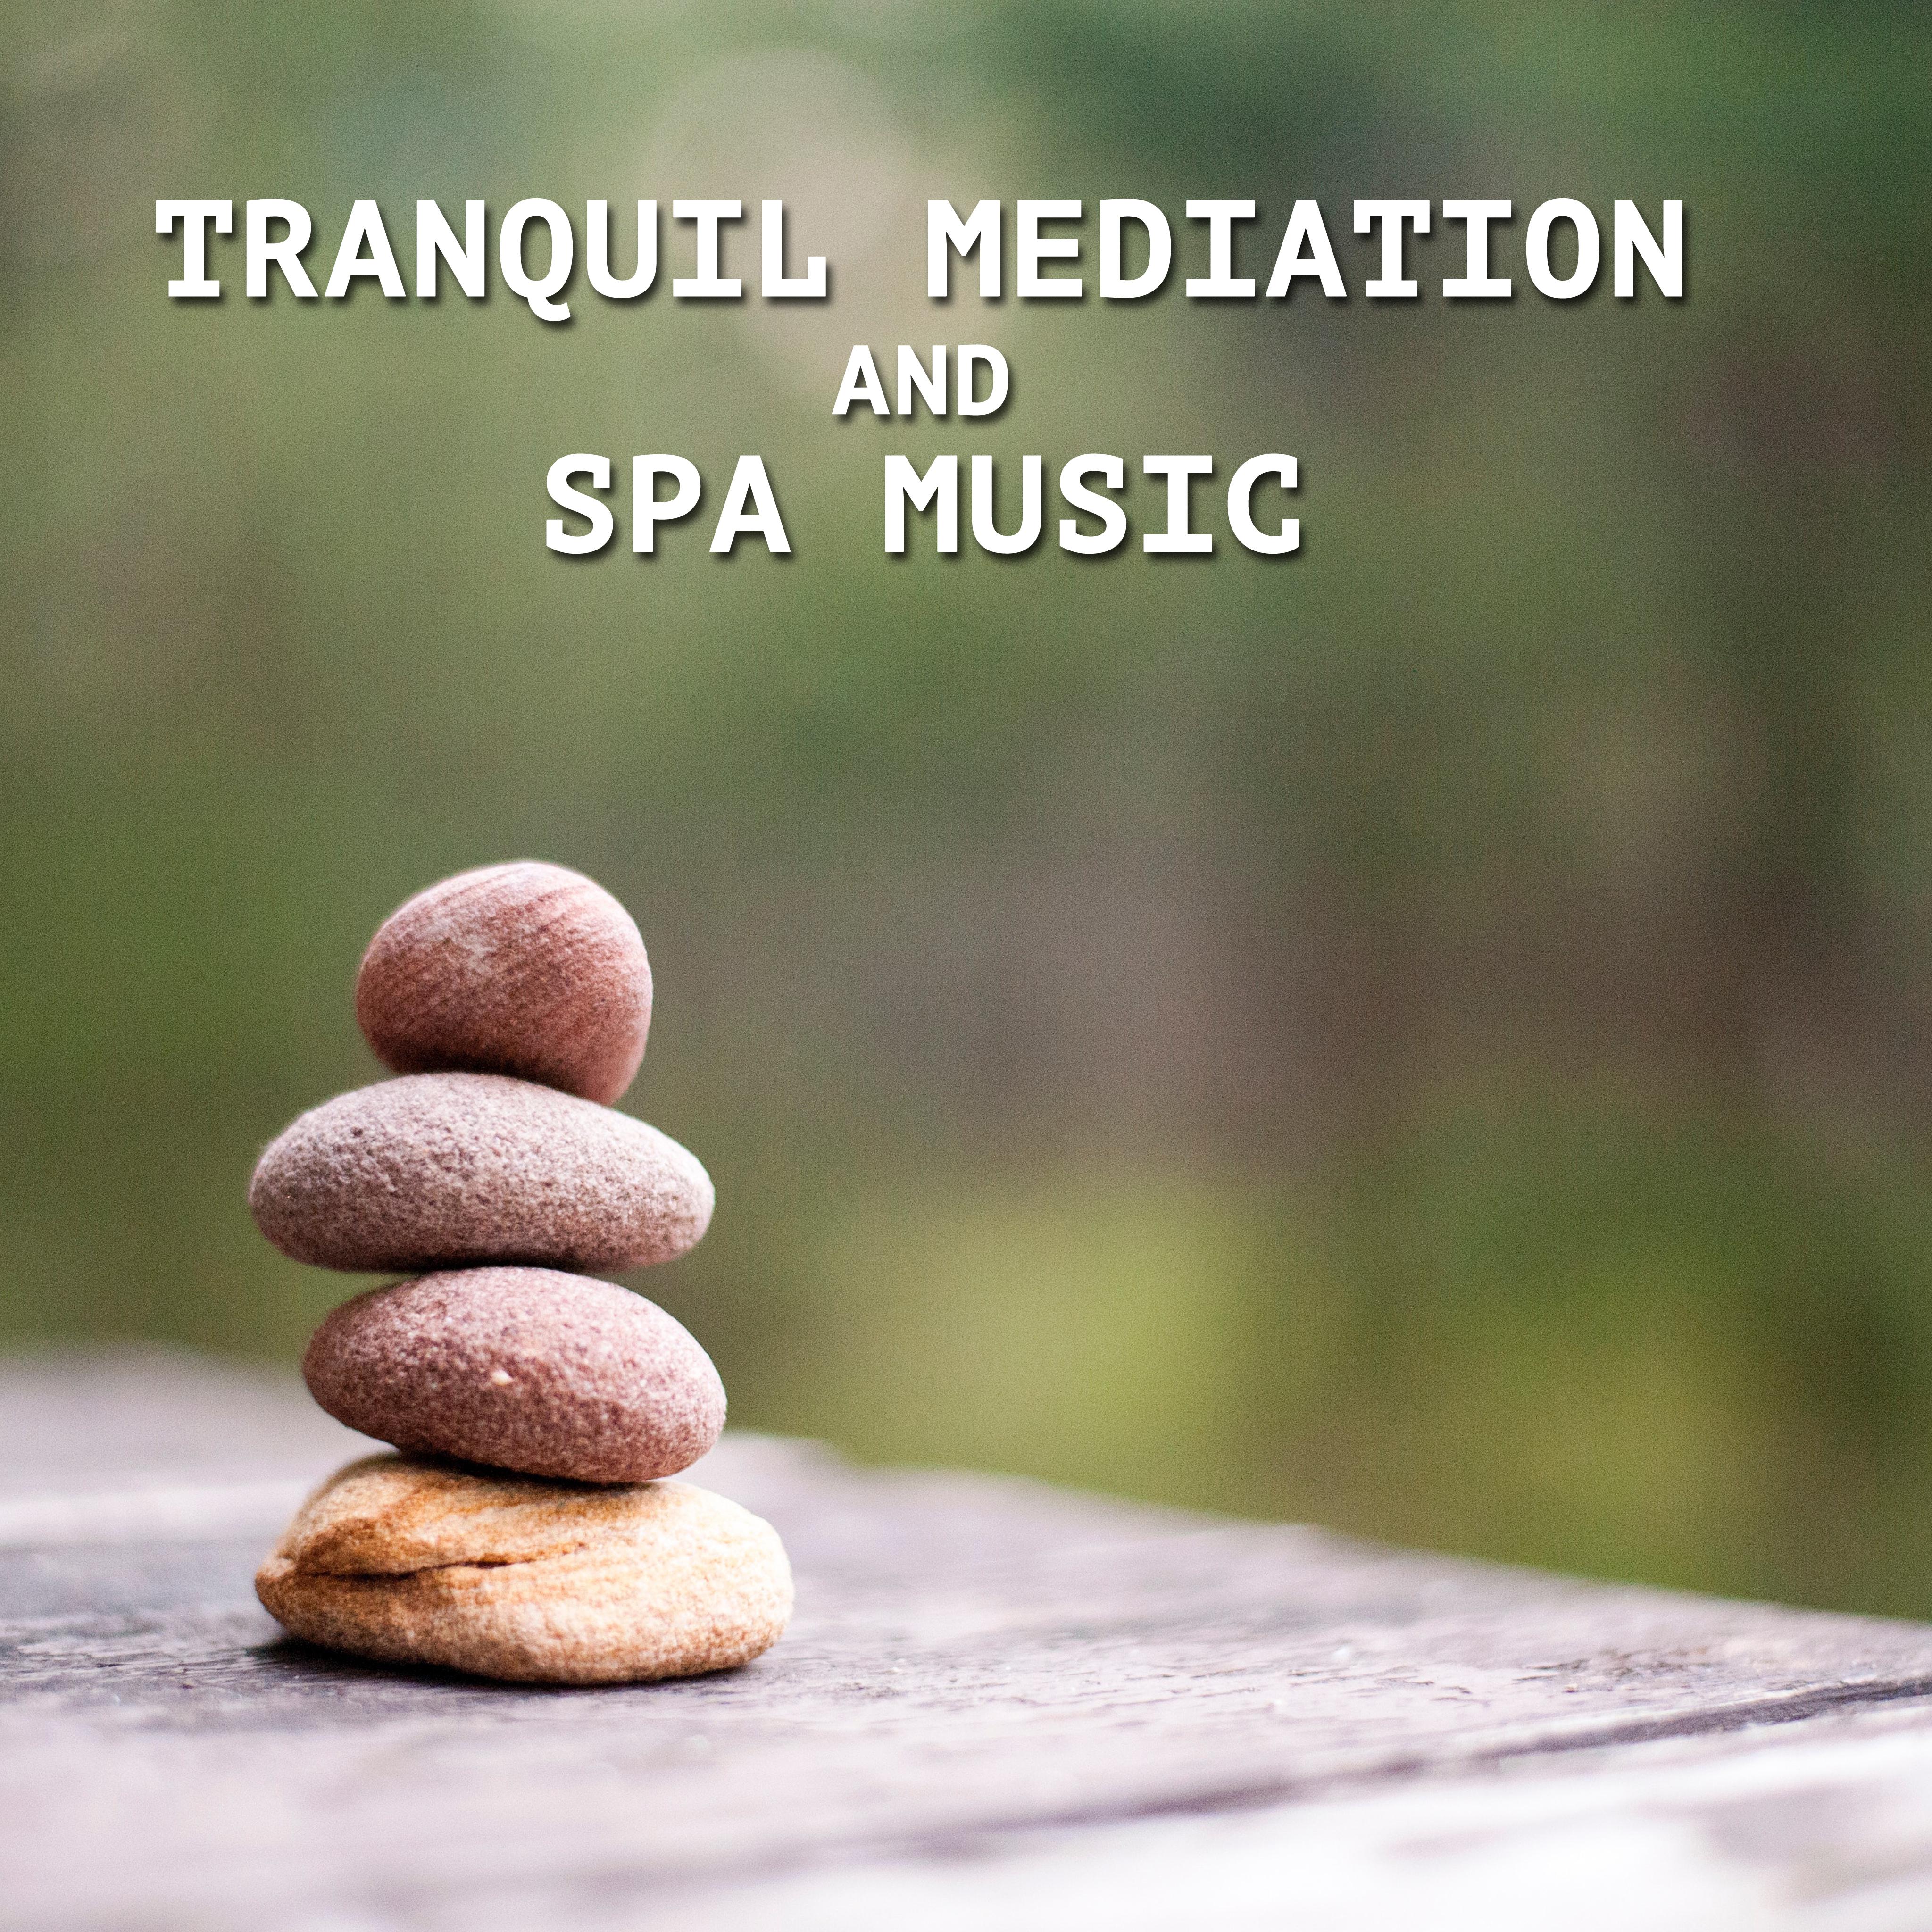 13 Tranquil Mediation and Spa Music